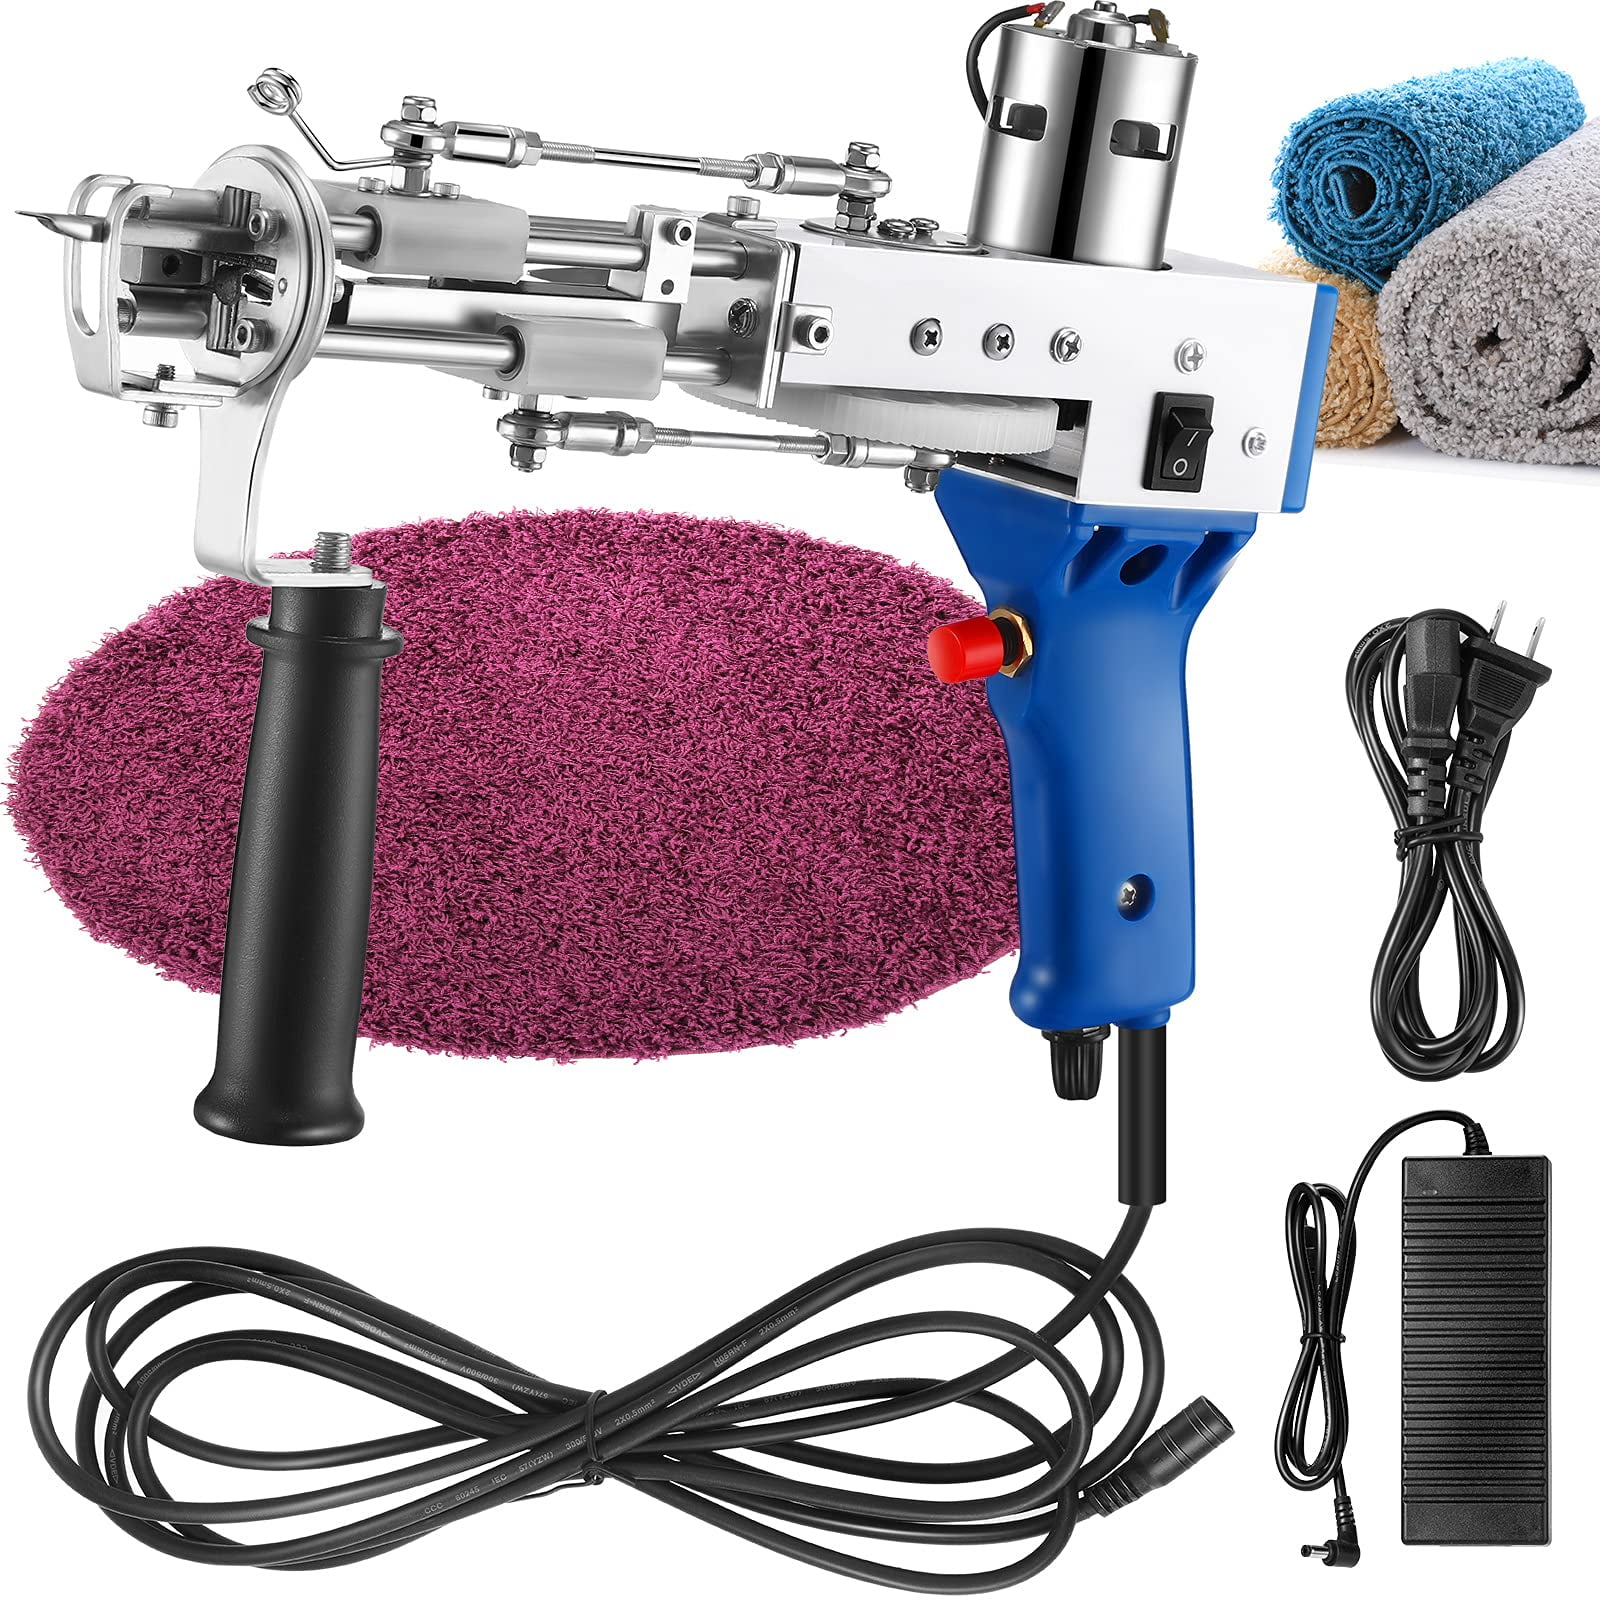 Industrial Embroidery Machine for DIY Woven Carpet 2 in 1 Cut Pile and Loop Pile Rug Tufting Gun Adjustable Speed and Pile High Handheld Carpet Weaving Flocking Machine Electric Carpet Tufting Gun 